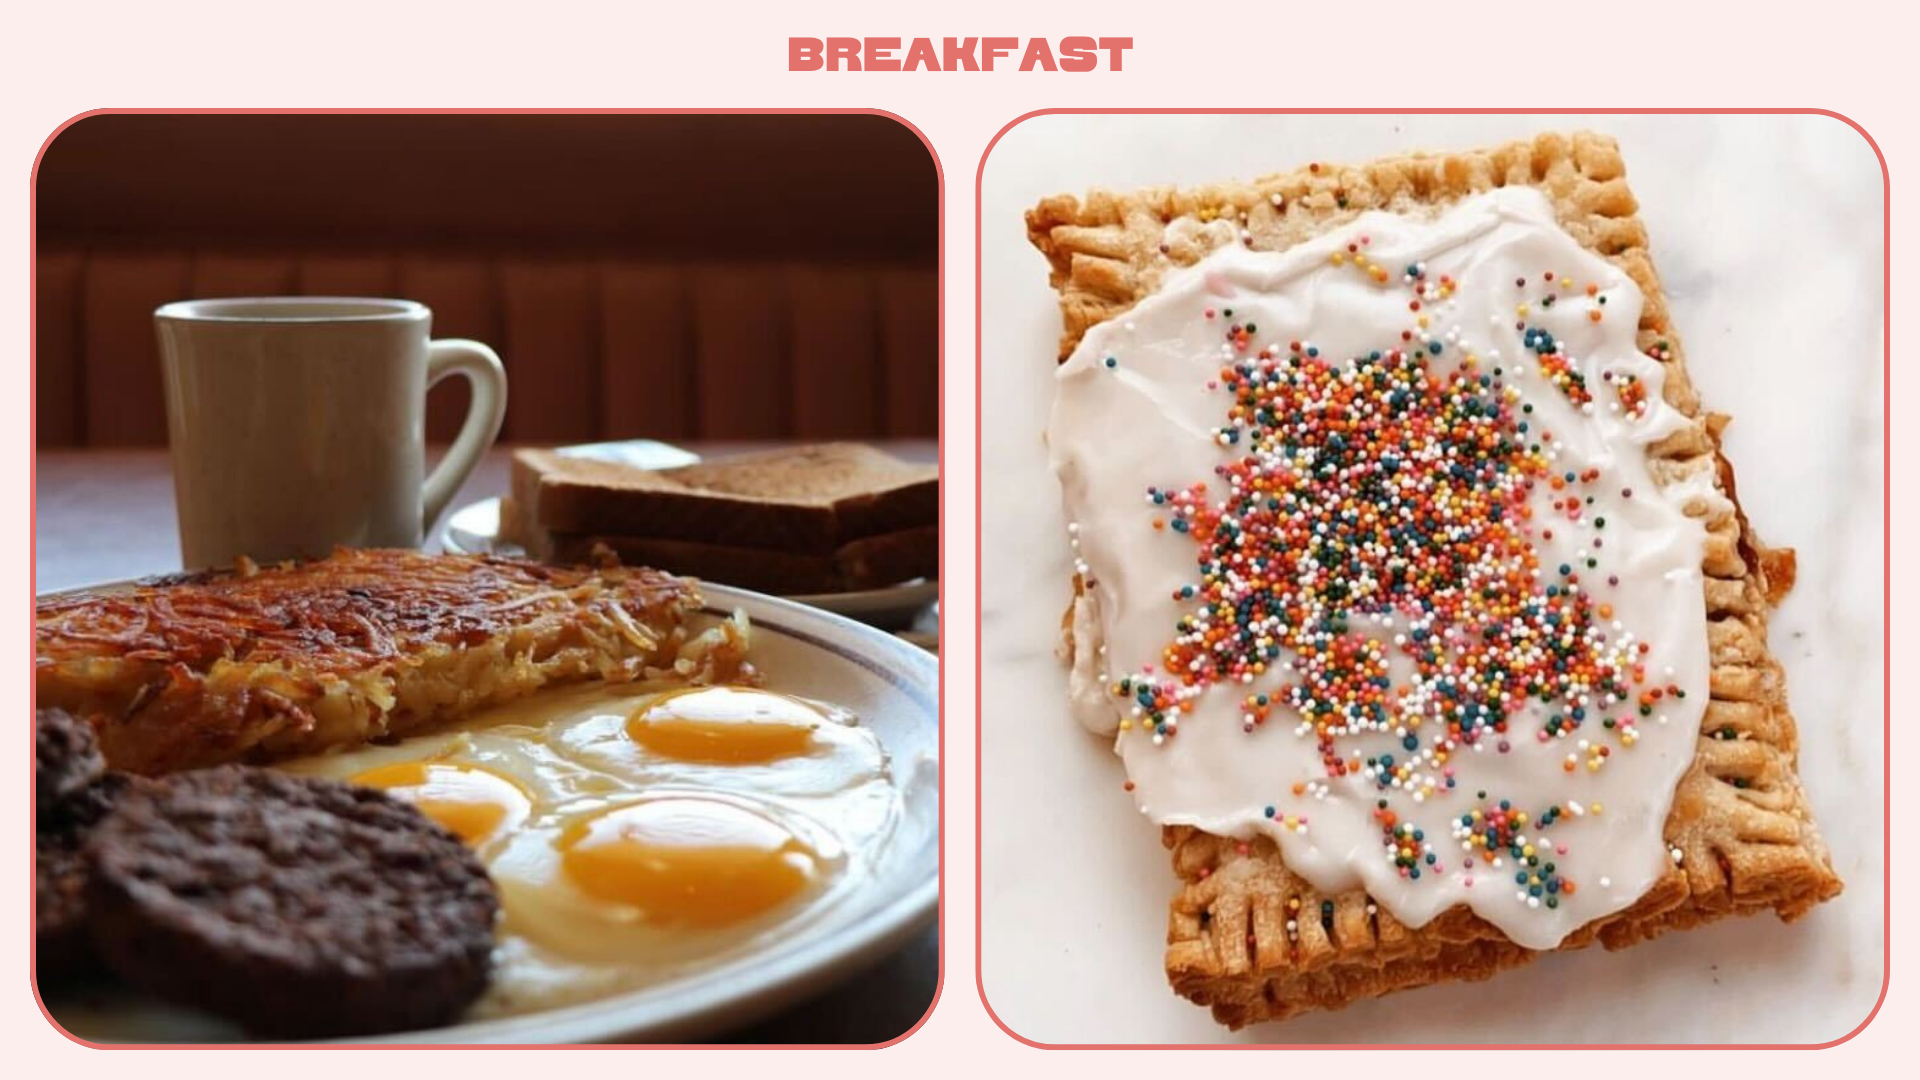 L: Sausage and egg breakfast at Canter's. R: A strawberry "Pop Tart"